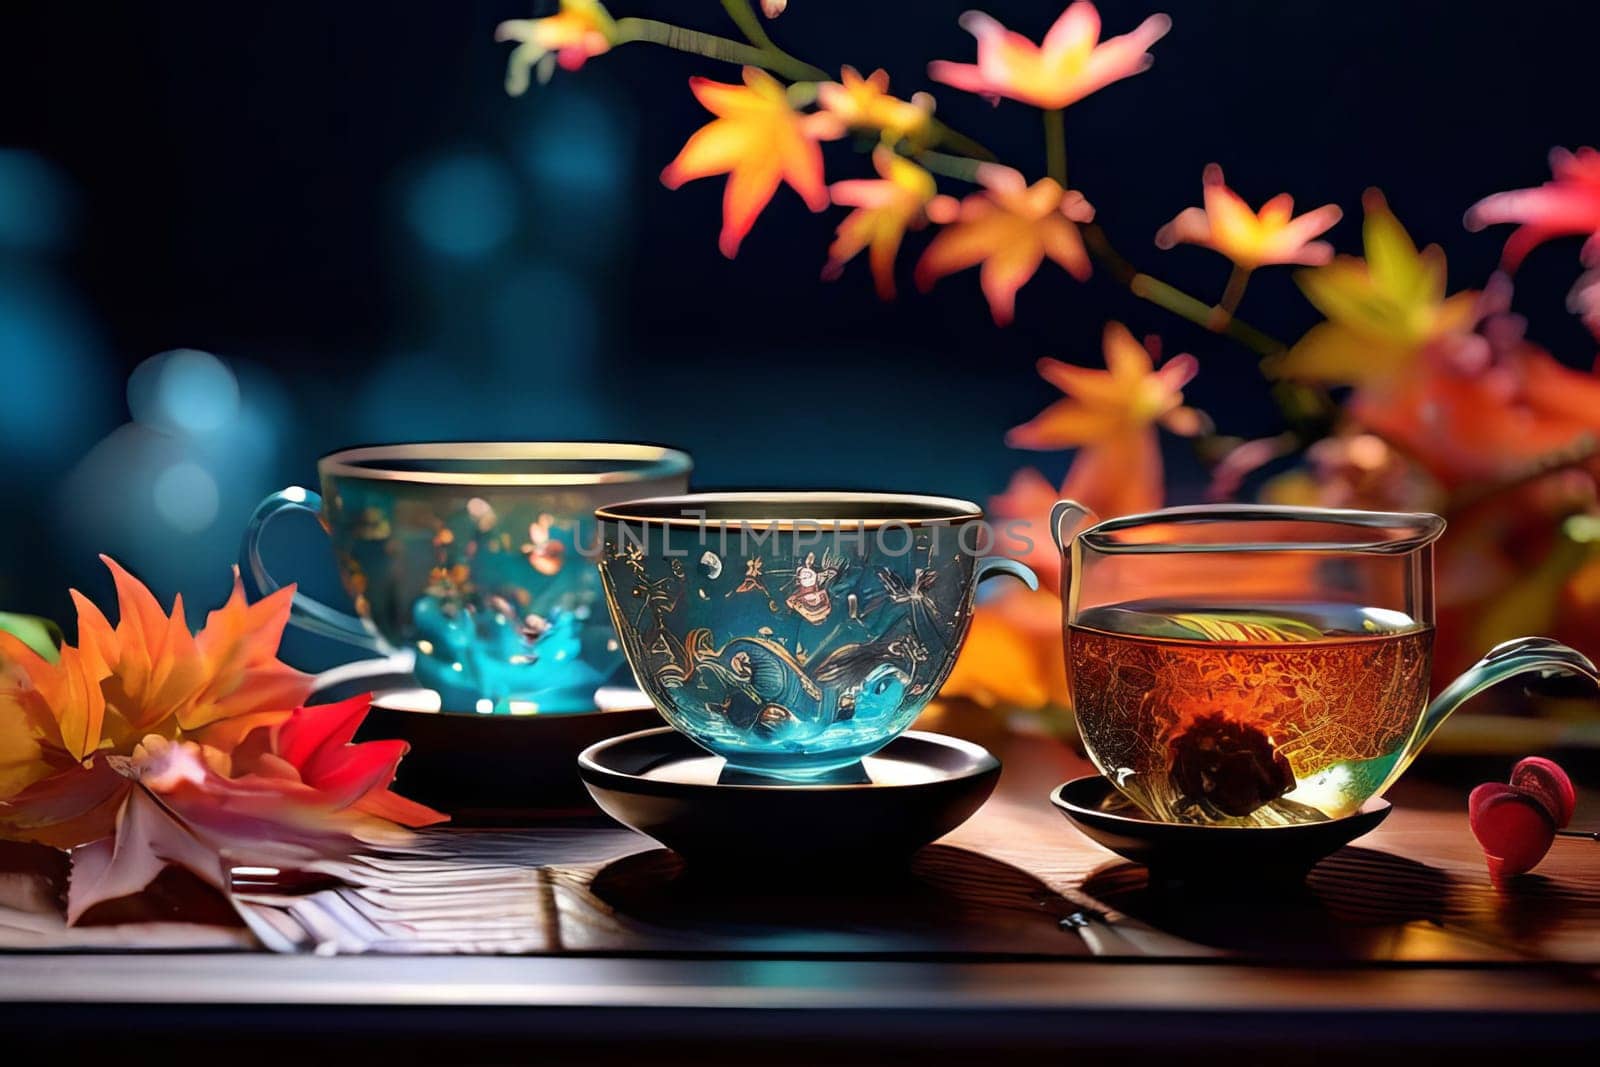 Vibrant Tea Ritual: A captivating display of colorful tea cups, scattered loose leaves, and a lively backdrop, evoking a sense of joy and relaxation. by Annu1tochka